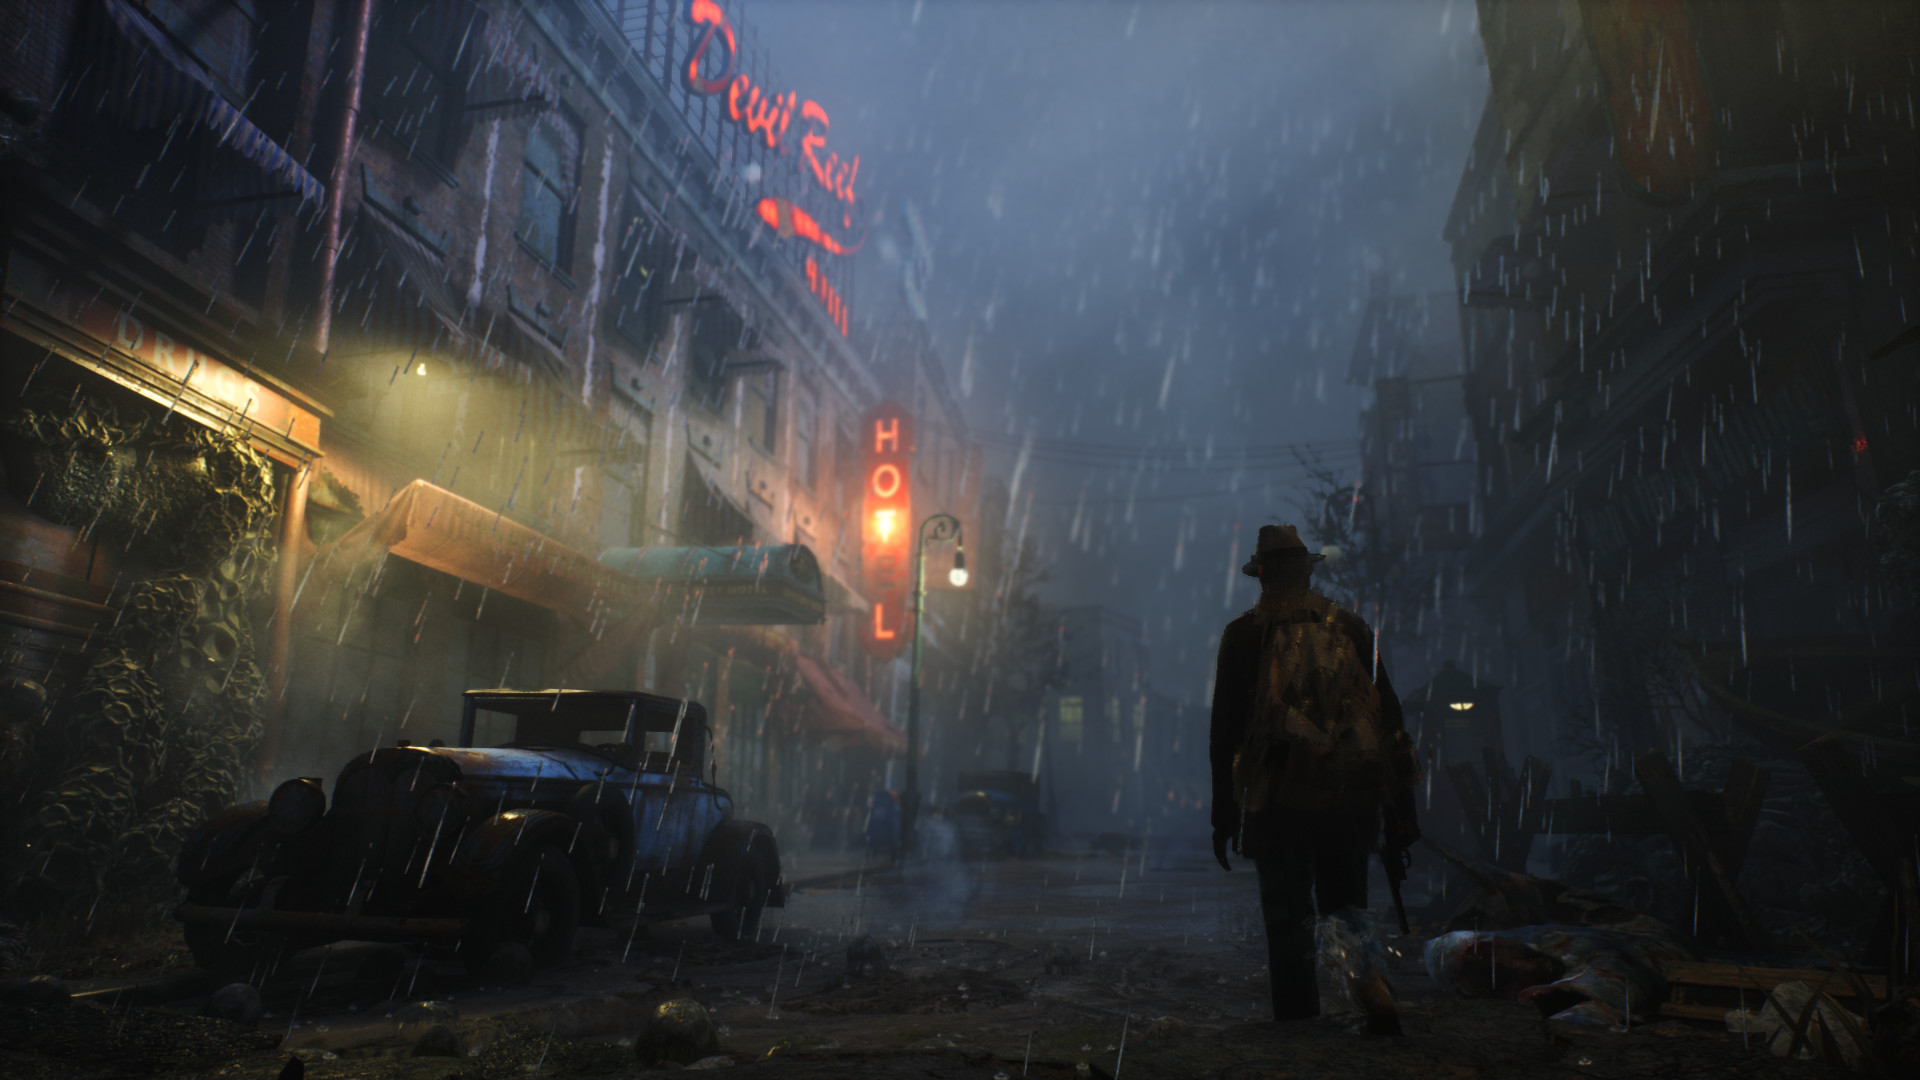 An Image Of The Sinking City - Sinking City - HD Wallpaper 